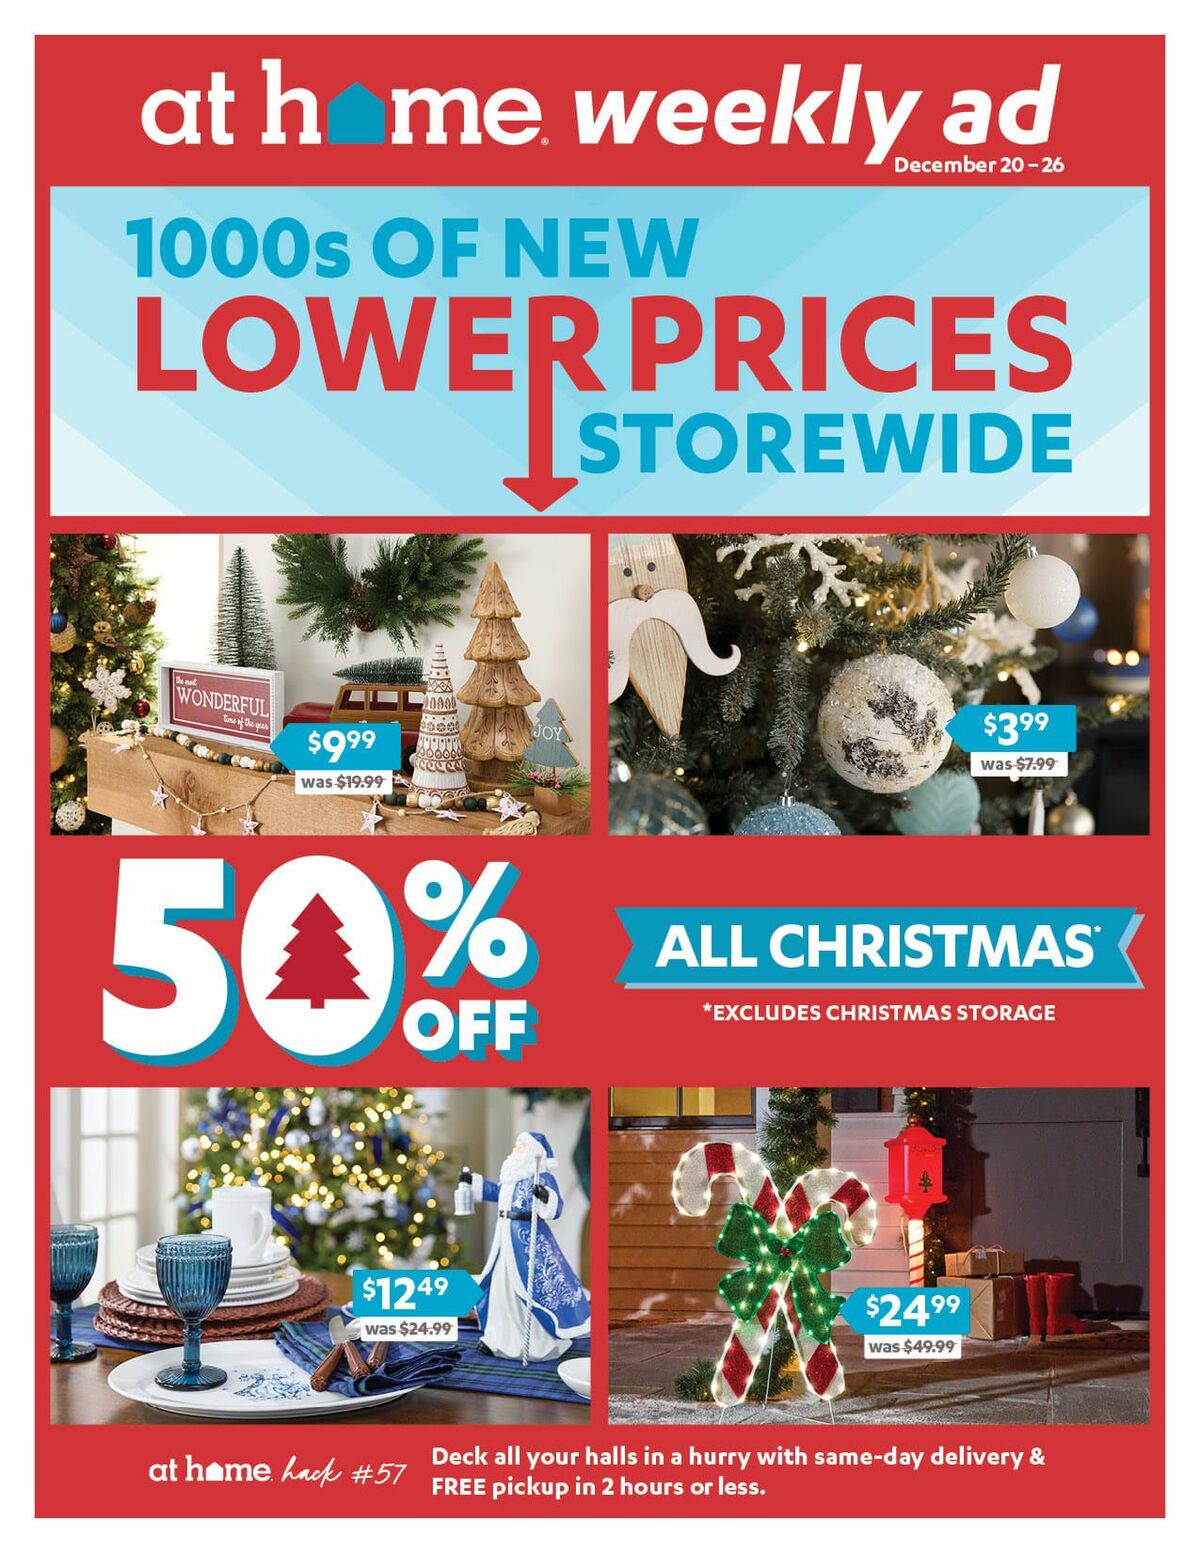 At Home Weekly Ad from December 20